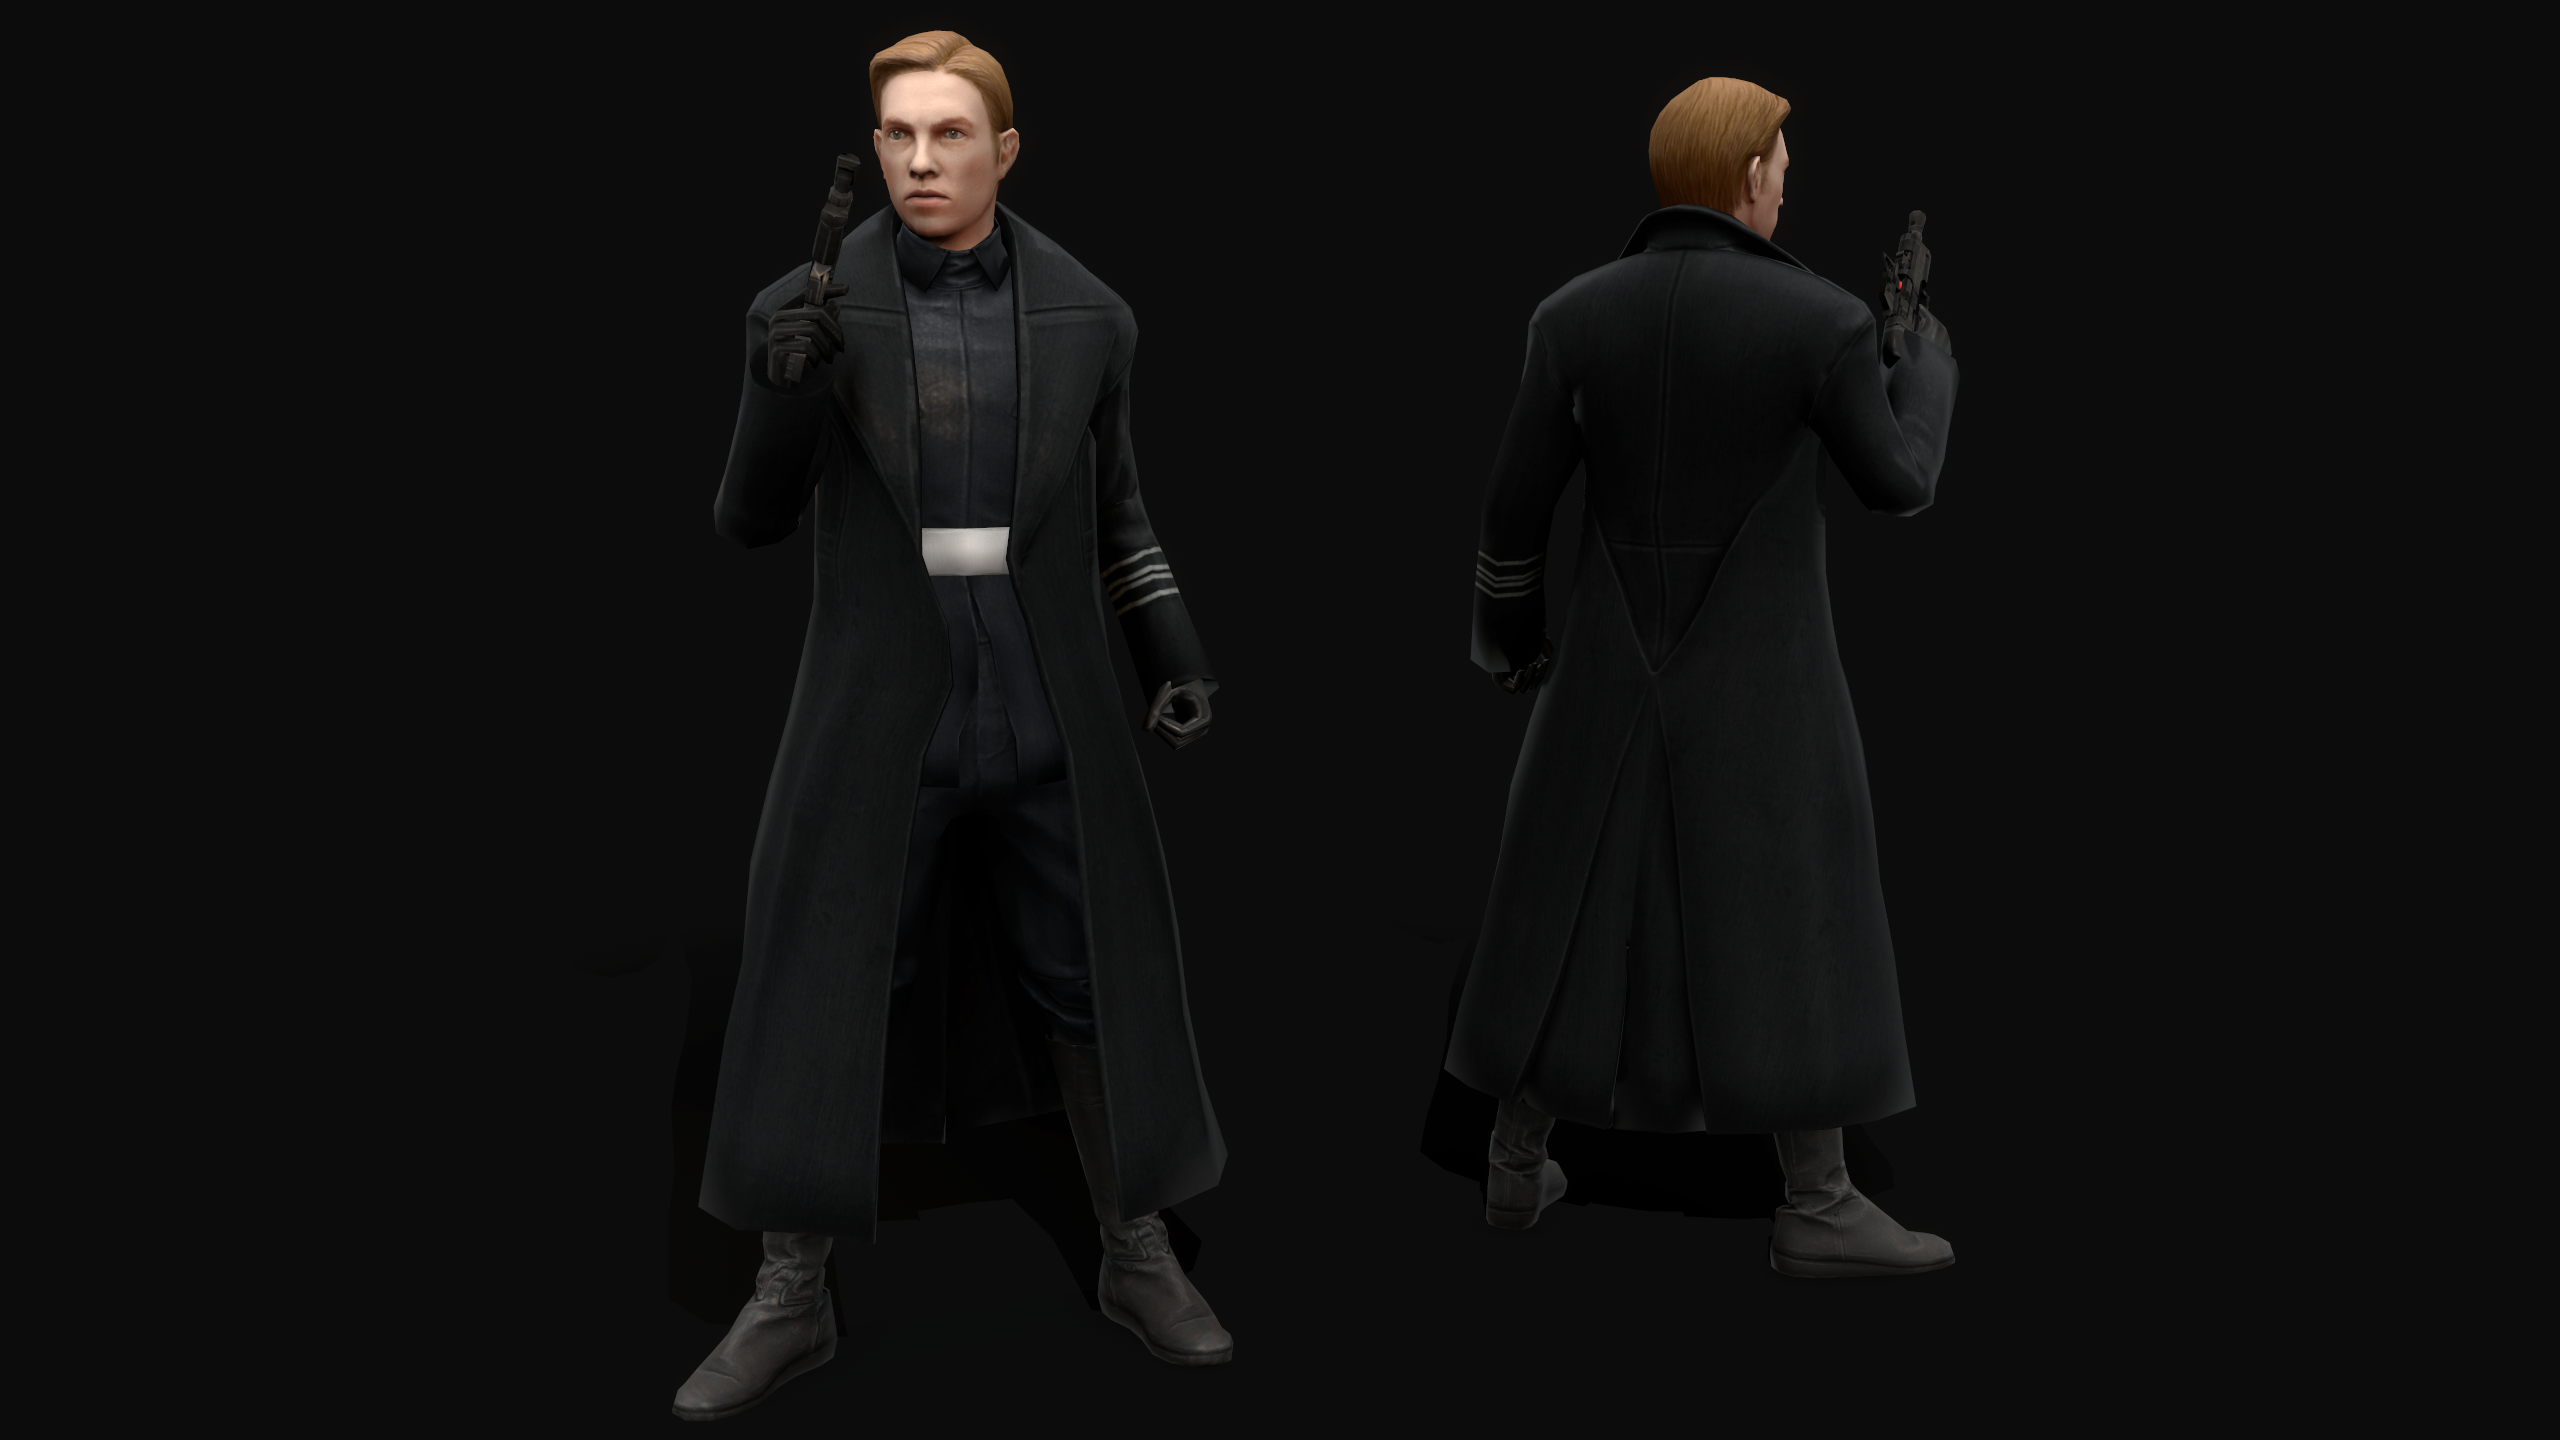 More information about "General Hux of the First Order"